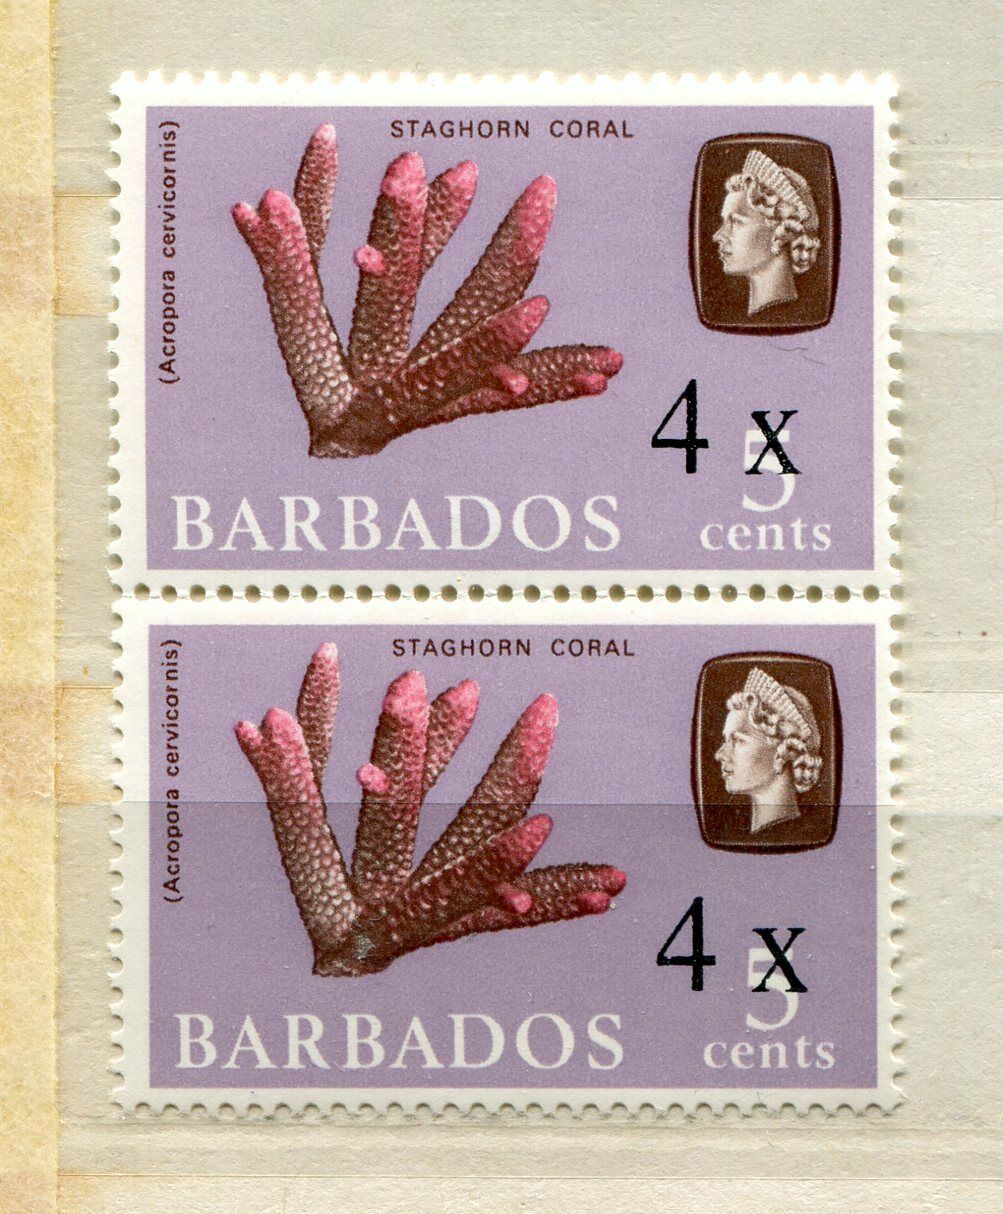 Fauna_848 1970 Barbados Marine Life Surcharge Overprint Pair Combined Payments